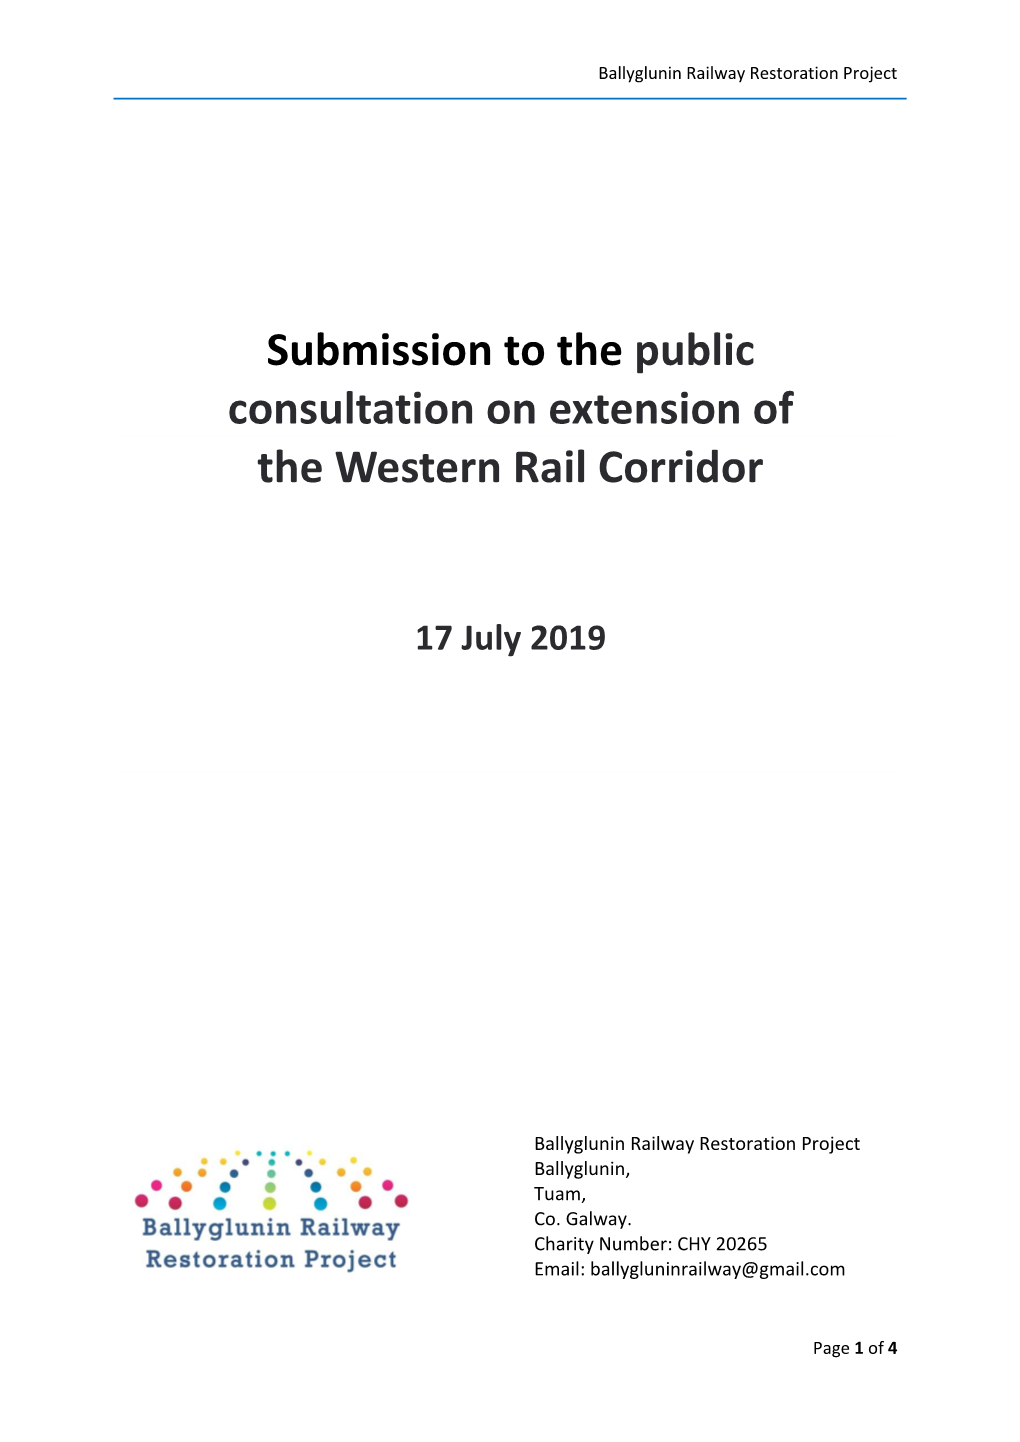 Submission to the Public Consultation on Extension of the Western Rail Corridor